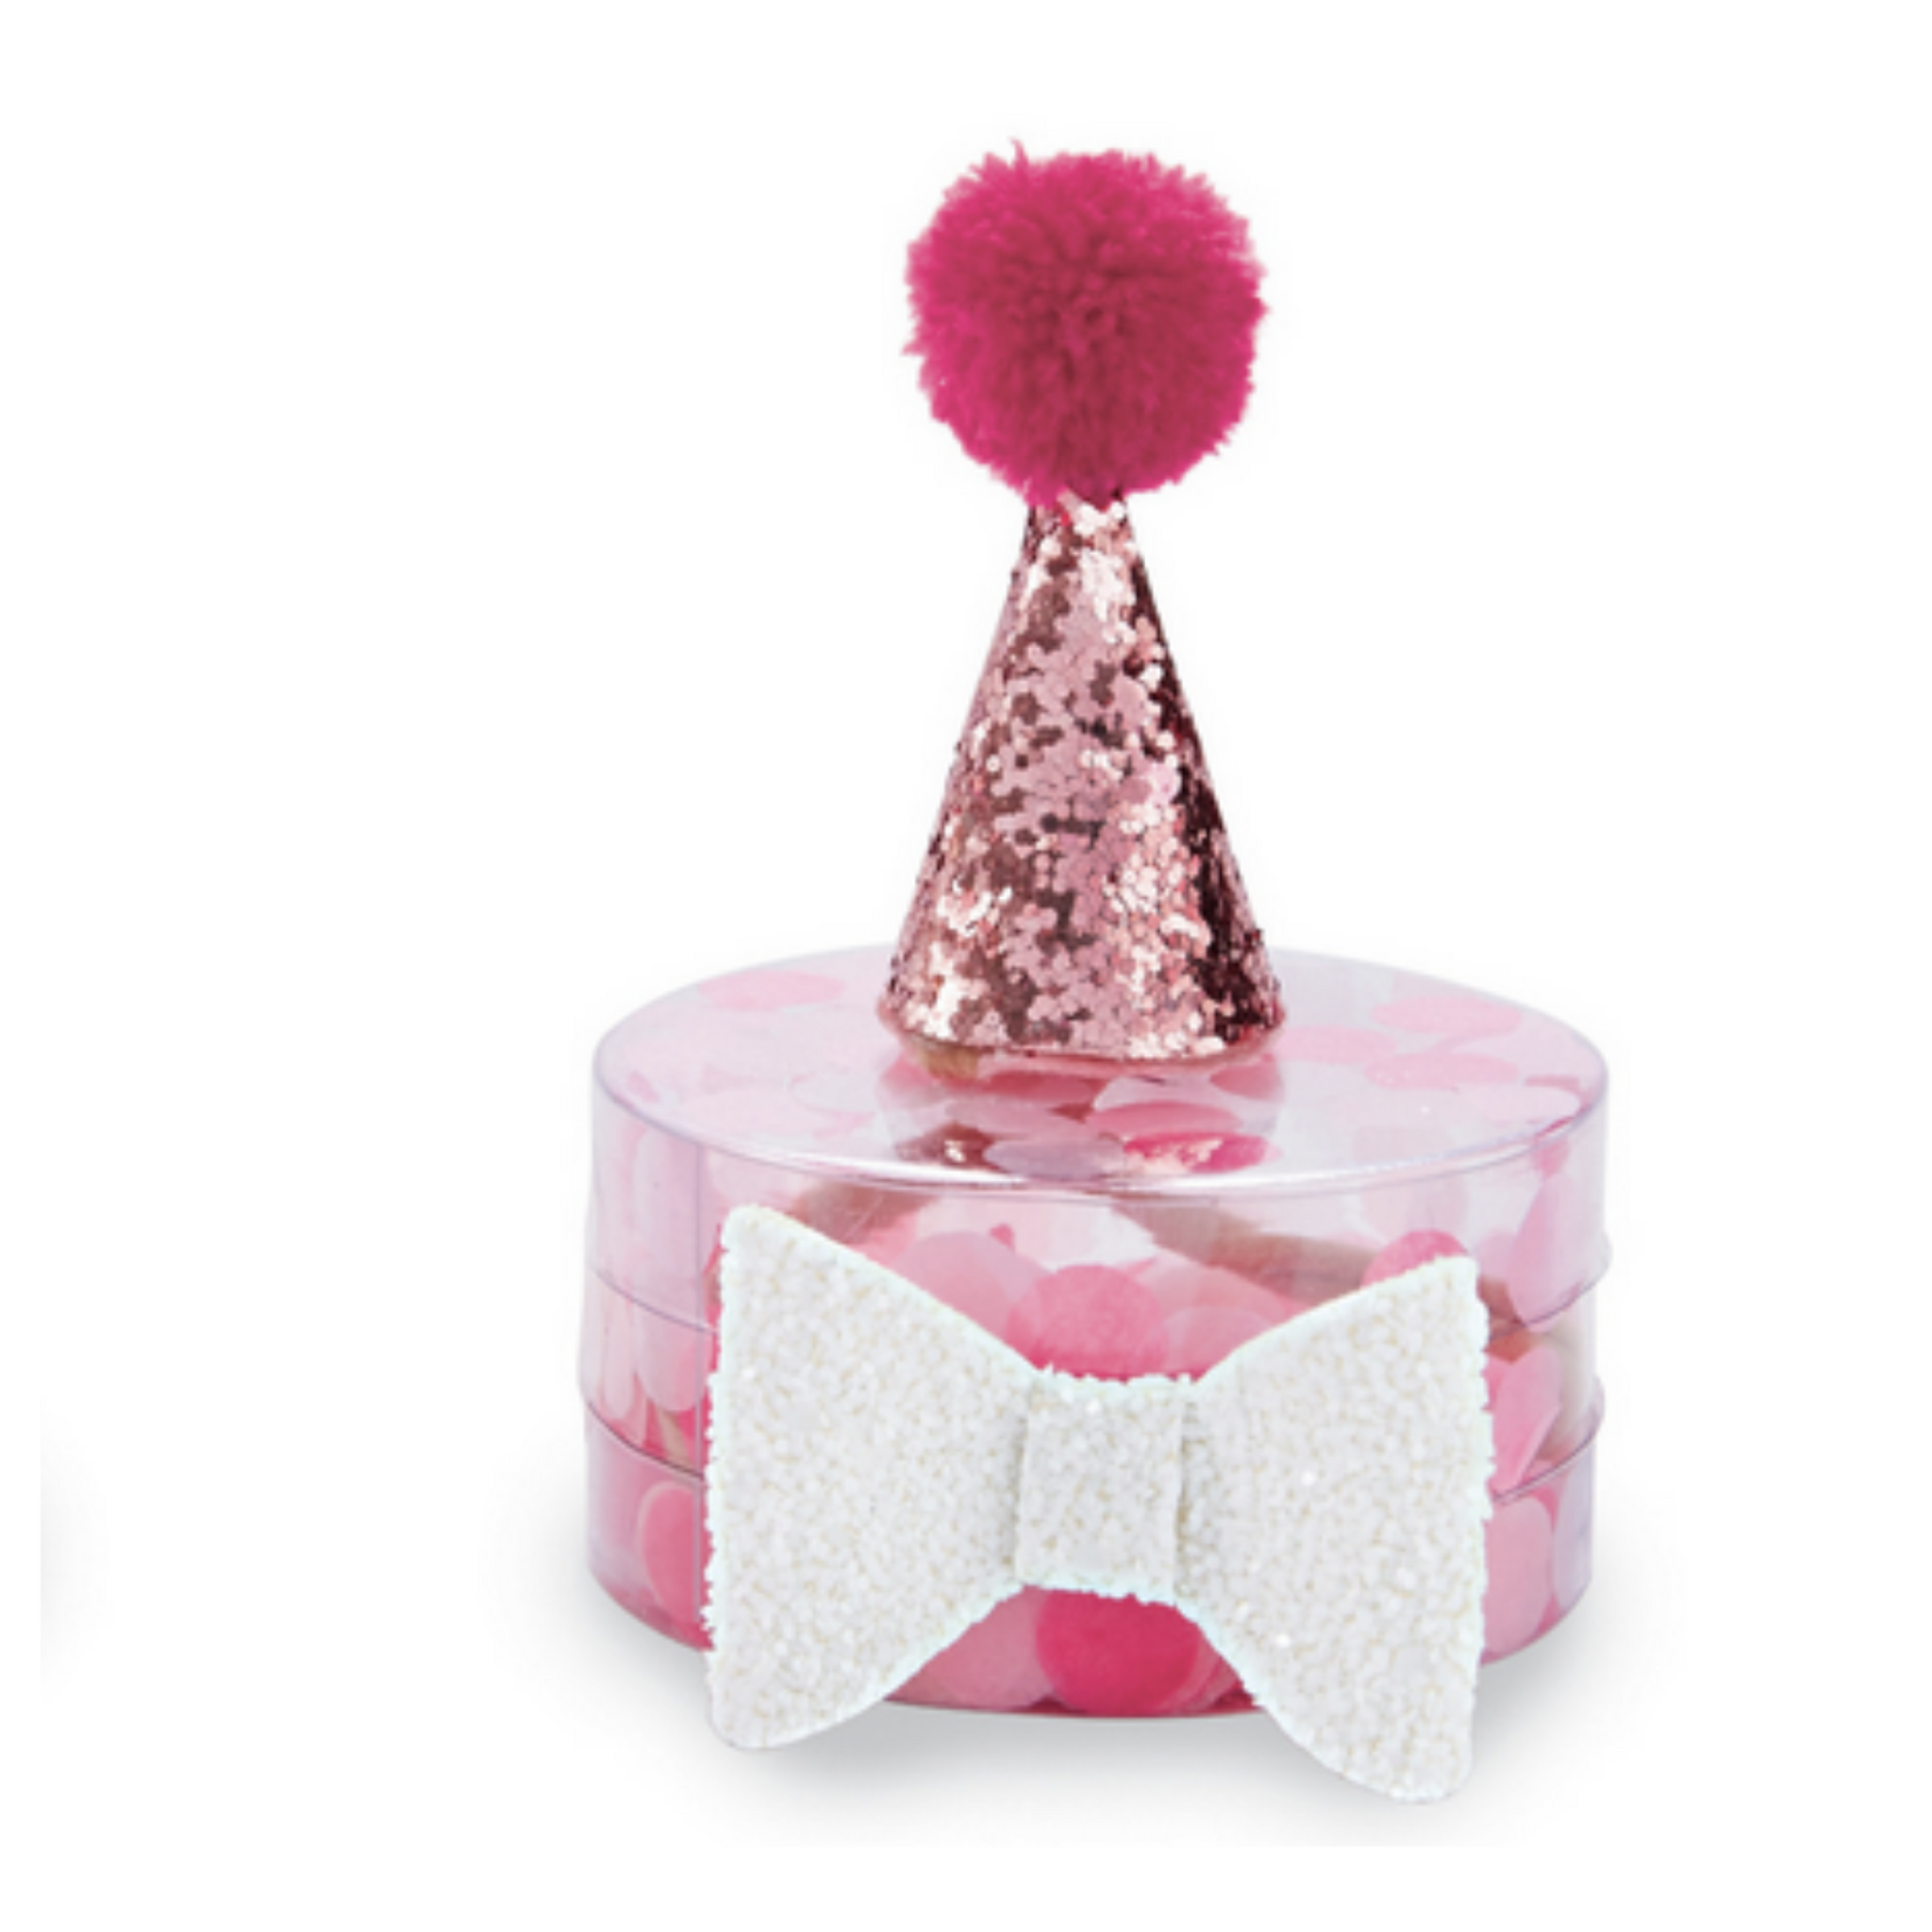 Mud Pie hot pink girls party hat and bow set